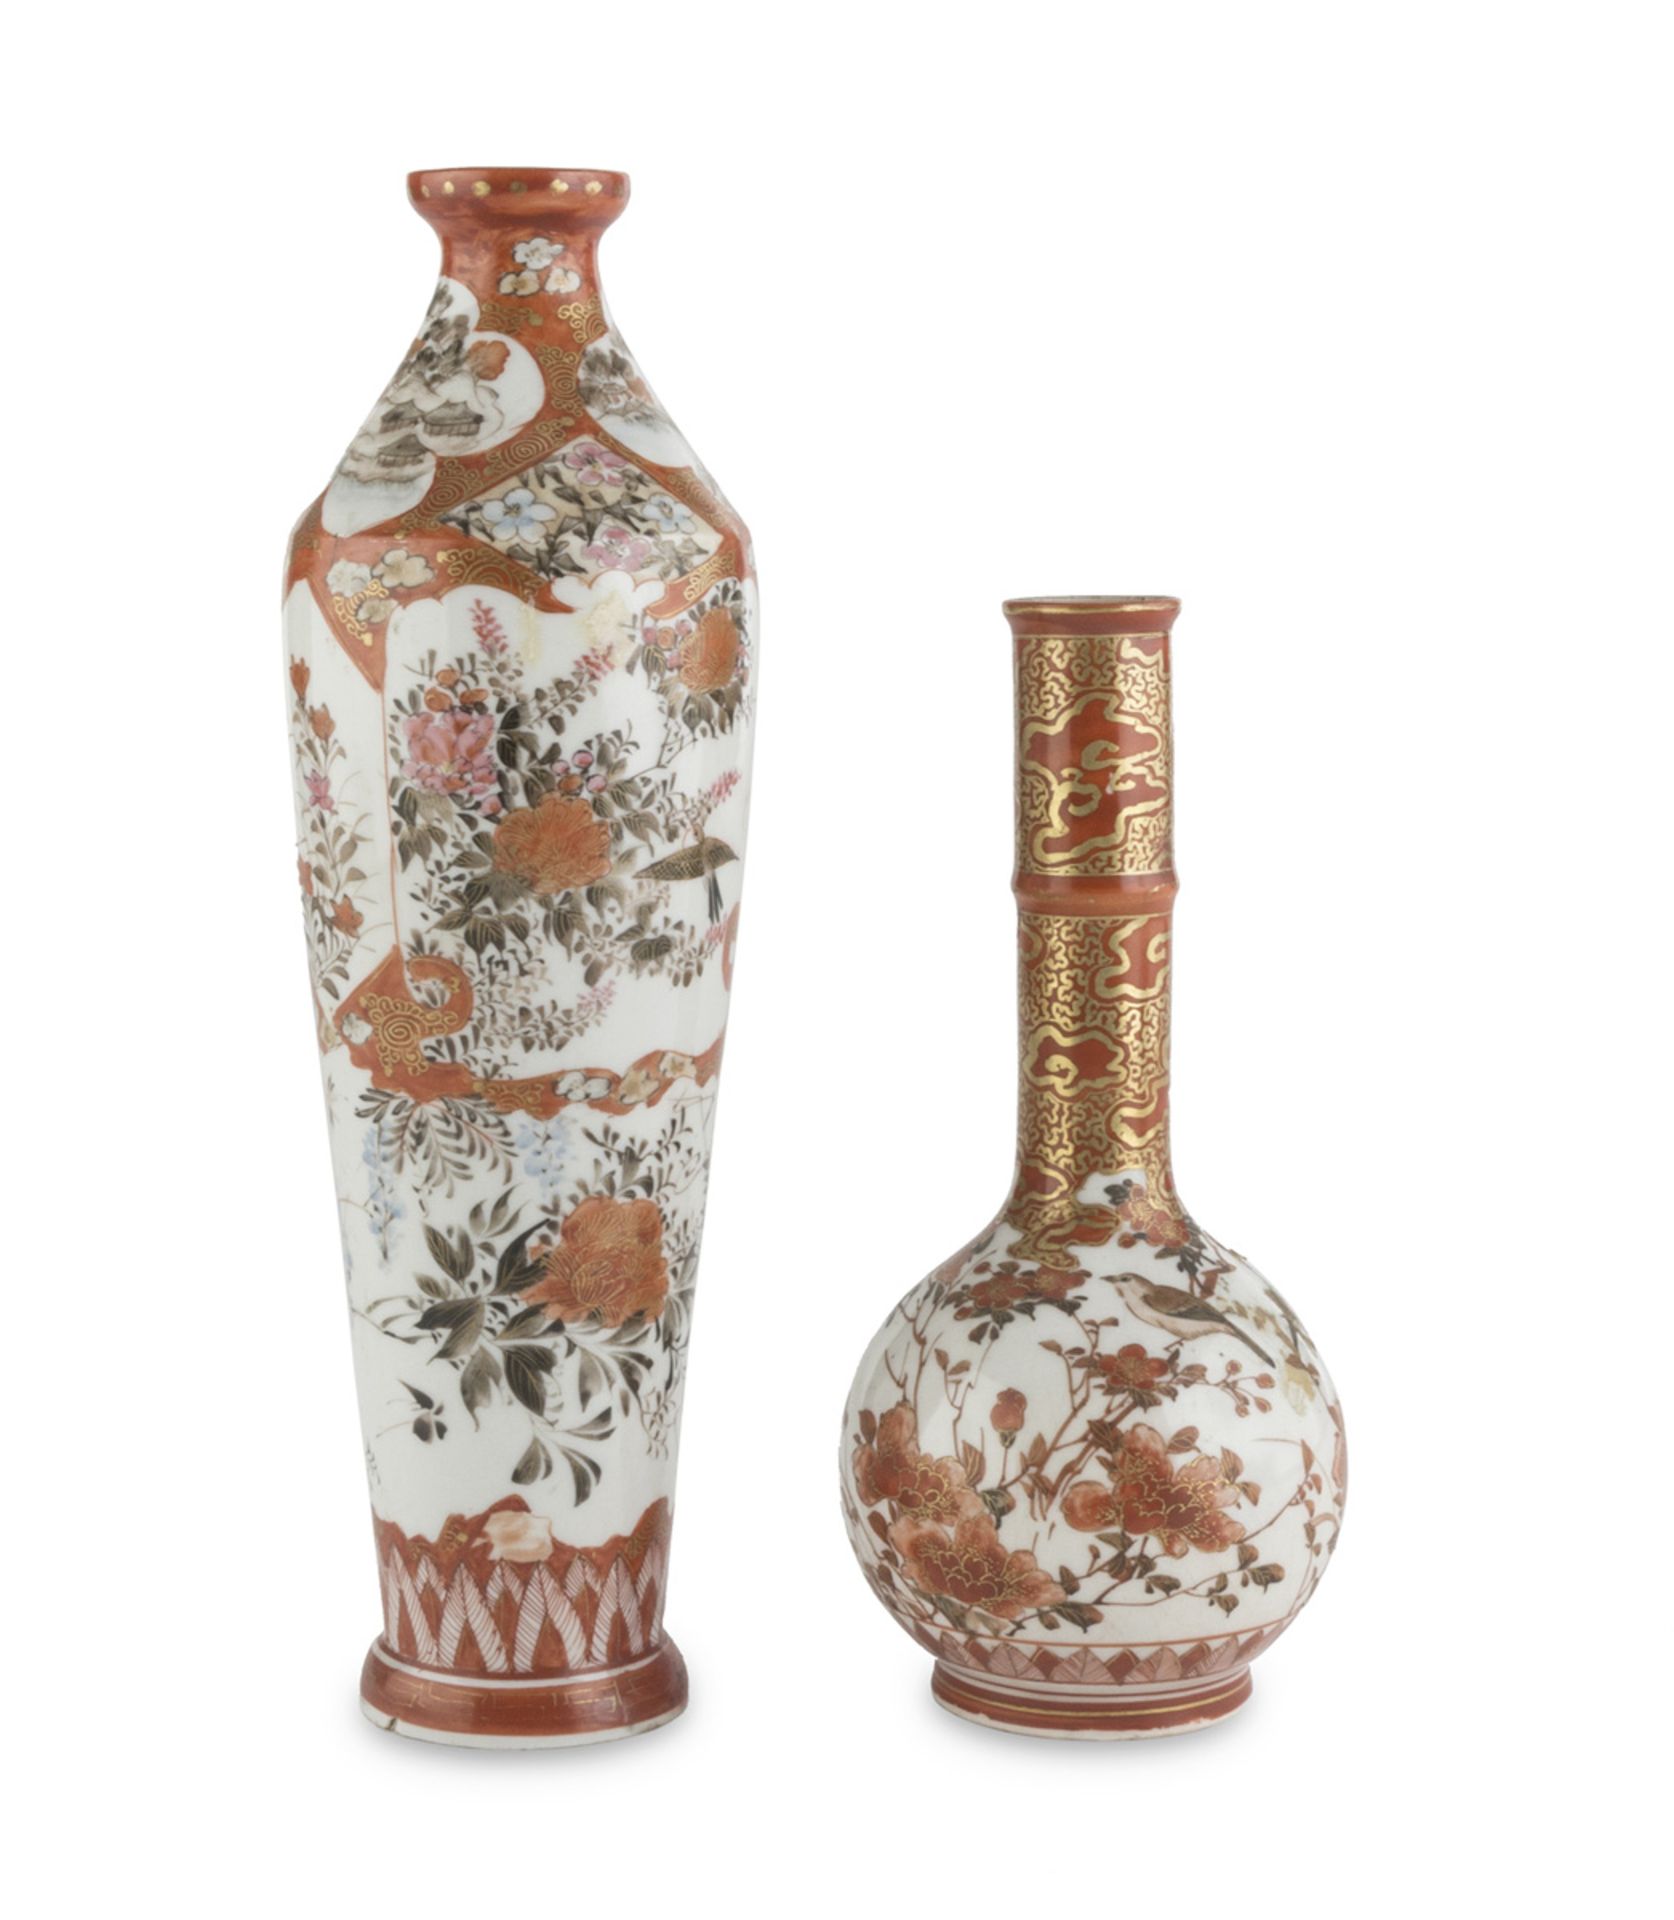 TWO POLYCHROME AND GOLD ENAMELLED PORCELAIN VASES JAPAN LATE 19TH-EARLY 20TH CENTURY